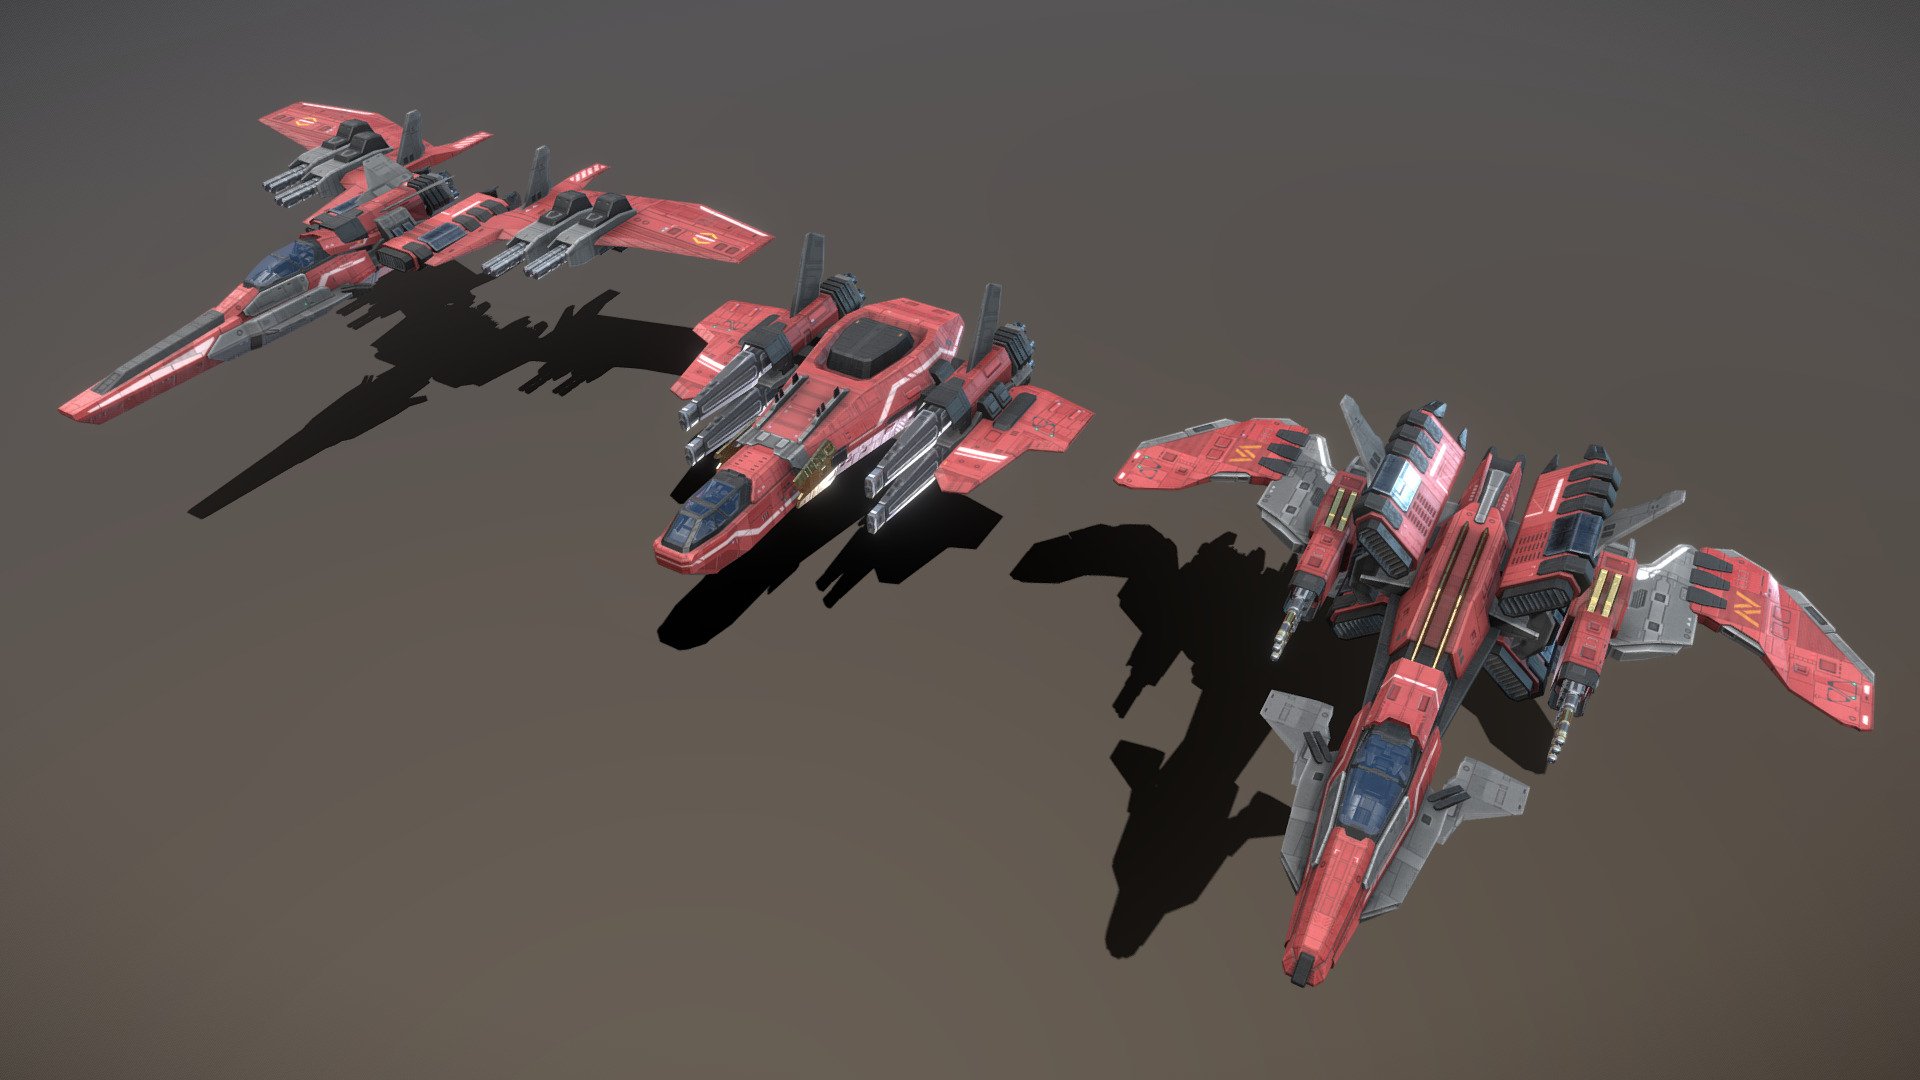 This is a model of a low-poly and game-ready scifi spaceship. The models consist of modular parts.

The weapons are separate meshes and can be animated with a keyframe animation tool. The weapon loadout can be changed too. 

This model has optional maneuvering thrusters for newtonian physics based movement. They do fit on other ships too.

The model comes with several differently colored texture sets. The PSD file with intact layers is included.

Please note: The textures in the Sketchfab viewer have a reduced resolution (2K instead of 4K) to improve Sketchfab loading speed.

If you have purchased this model please make sure to download the “additional file”.  It contains FBX and OBJ meshes, full resolution textures and the source PSDs with intact layers. The meshes are separate and can be animated (e.g. firing animations for gun barrels, rotating turrets, etc) 3d model